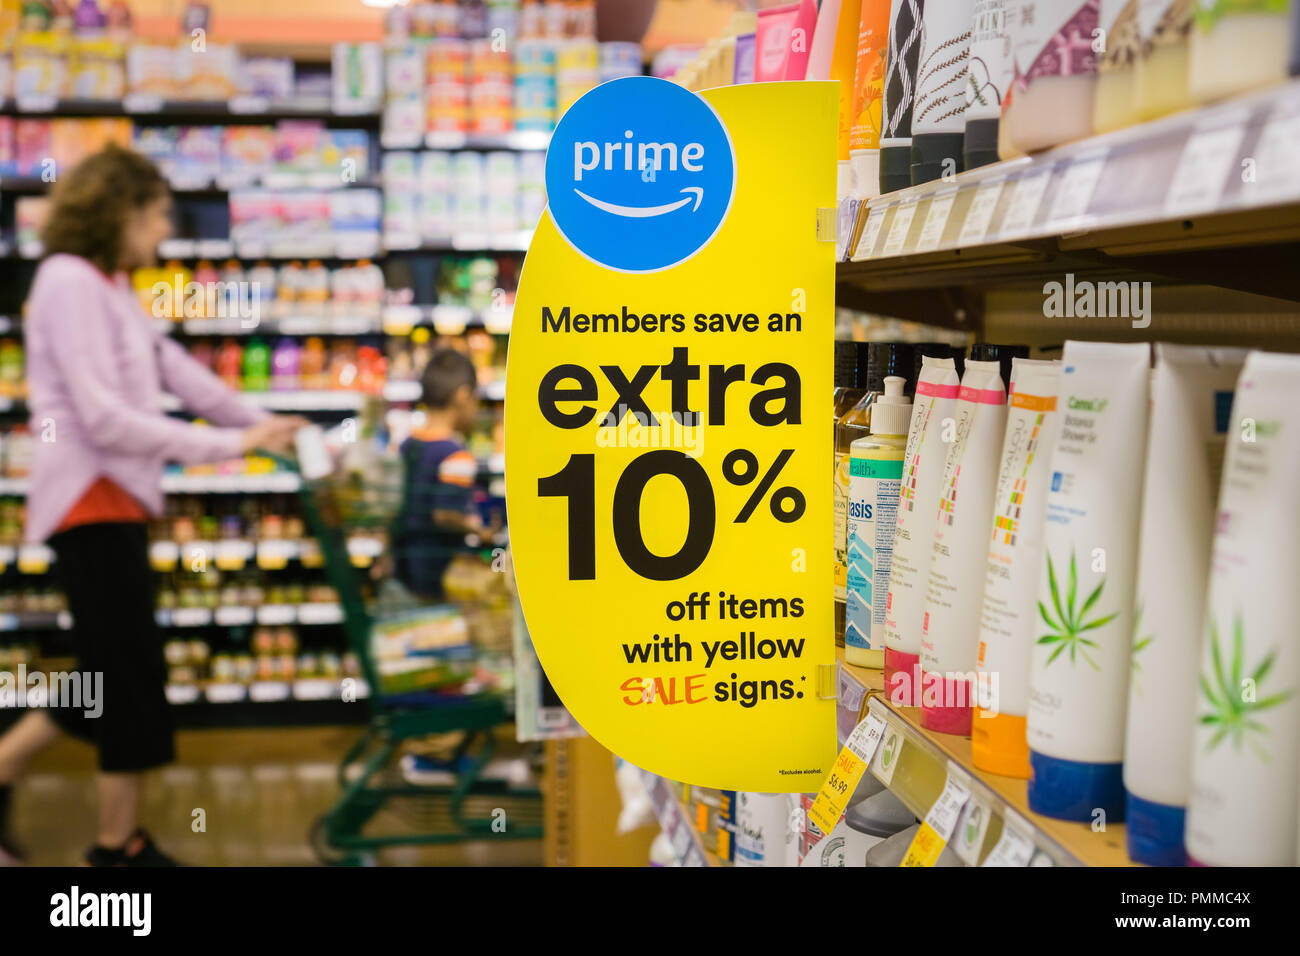 August 30, 2018 Los Altos / CA / USA - Sign advertising that Amazon offers additional discounts for Prime members at the Whole Foods stores Stock Photo